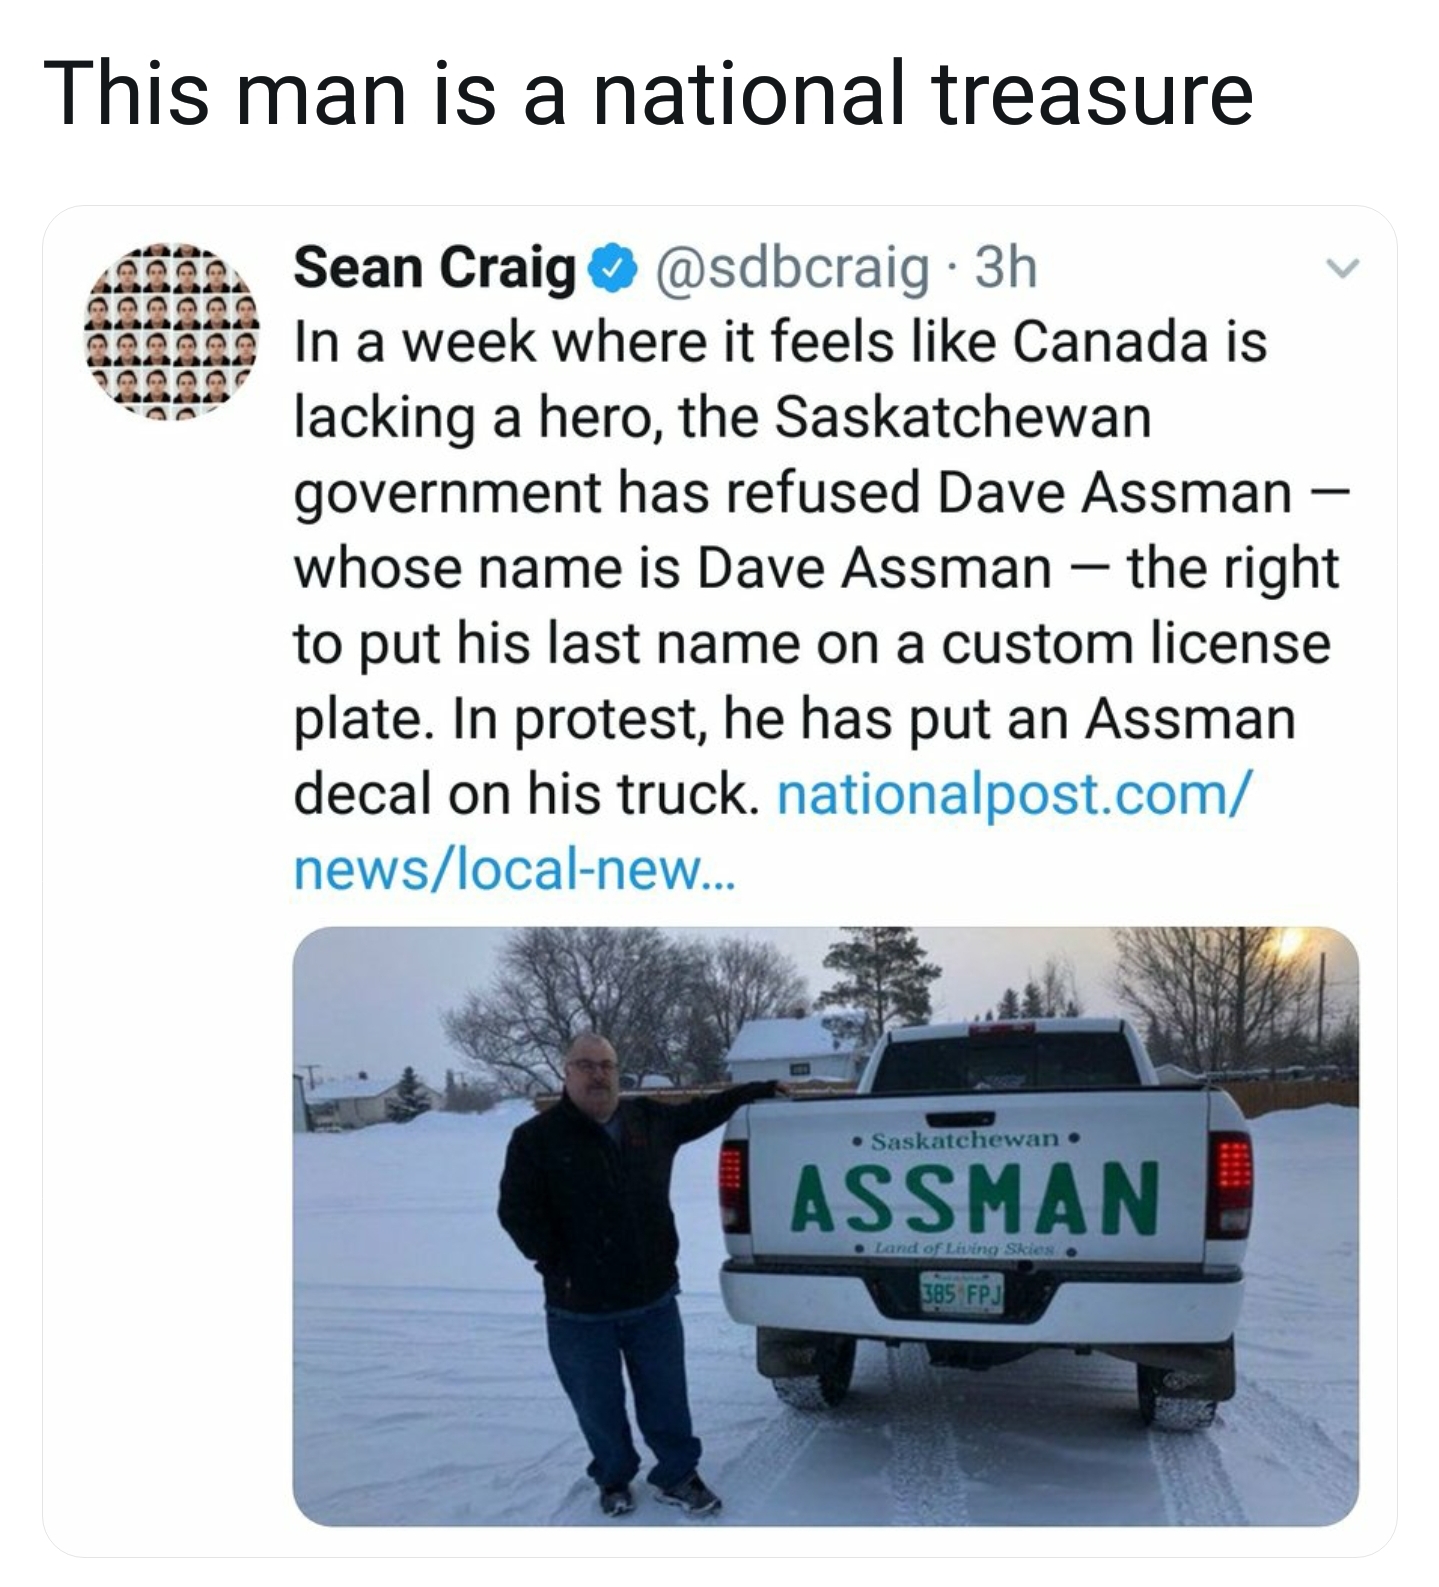 memes - water - This man is a national treasure Sean Craig . 3h Sarars In a week where it feels Canada is lacking a hero, the Saskatchewan government has refused Dave Assman whose name is Dave Assman the right to put his last name on a custom license plat